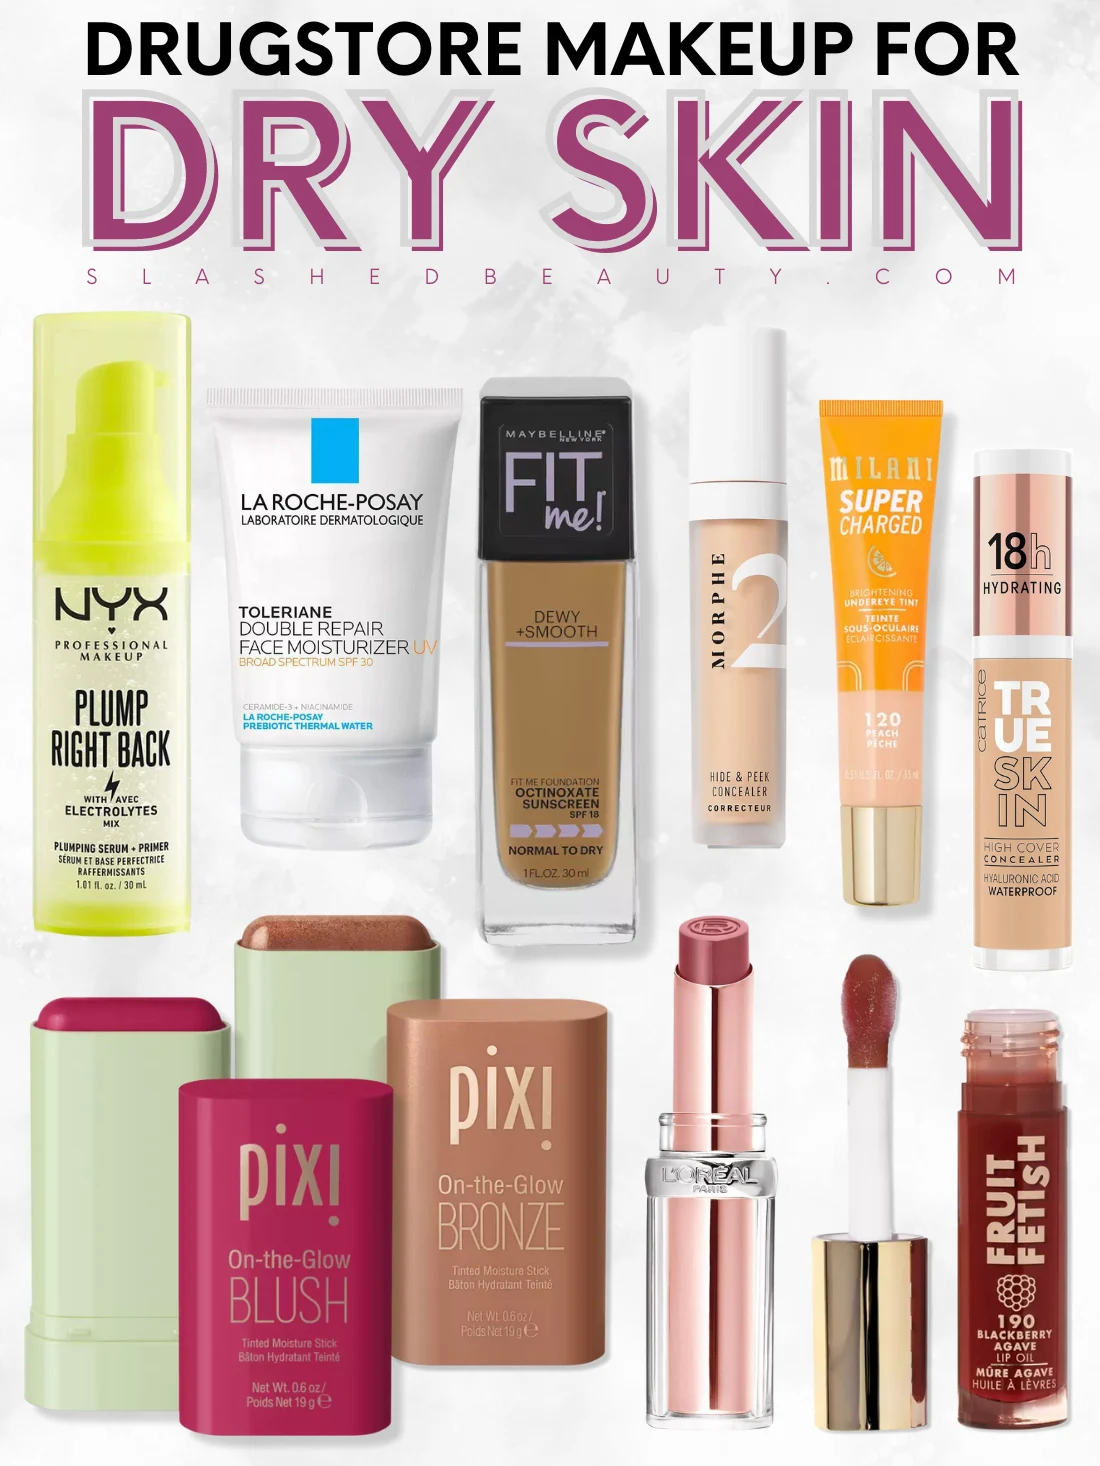 Collage of drugstore makeup with ،le text: Drugstore Makeup for Dry Skin | Slashed Beauty